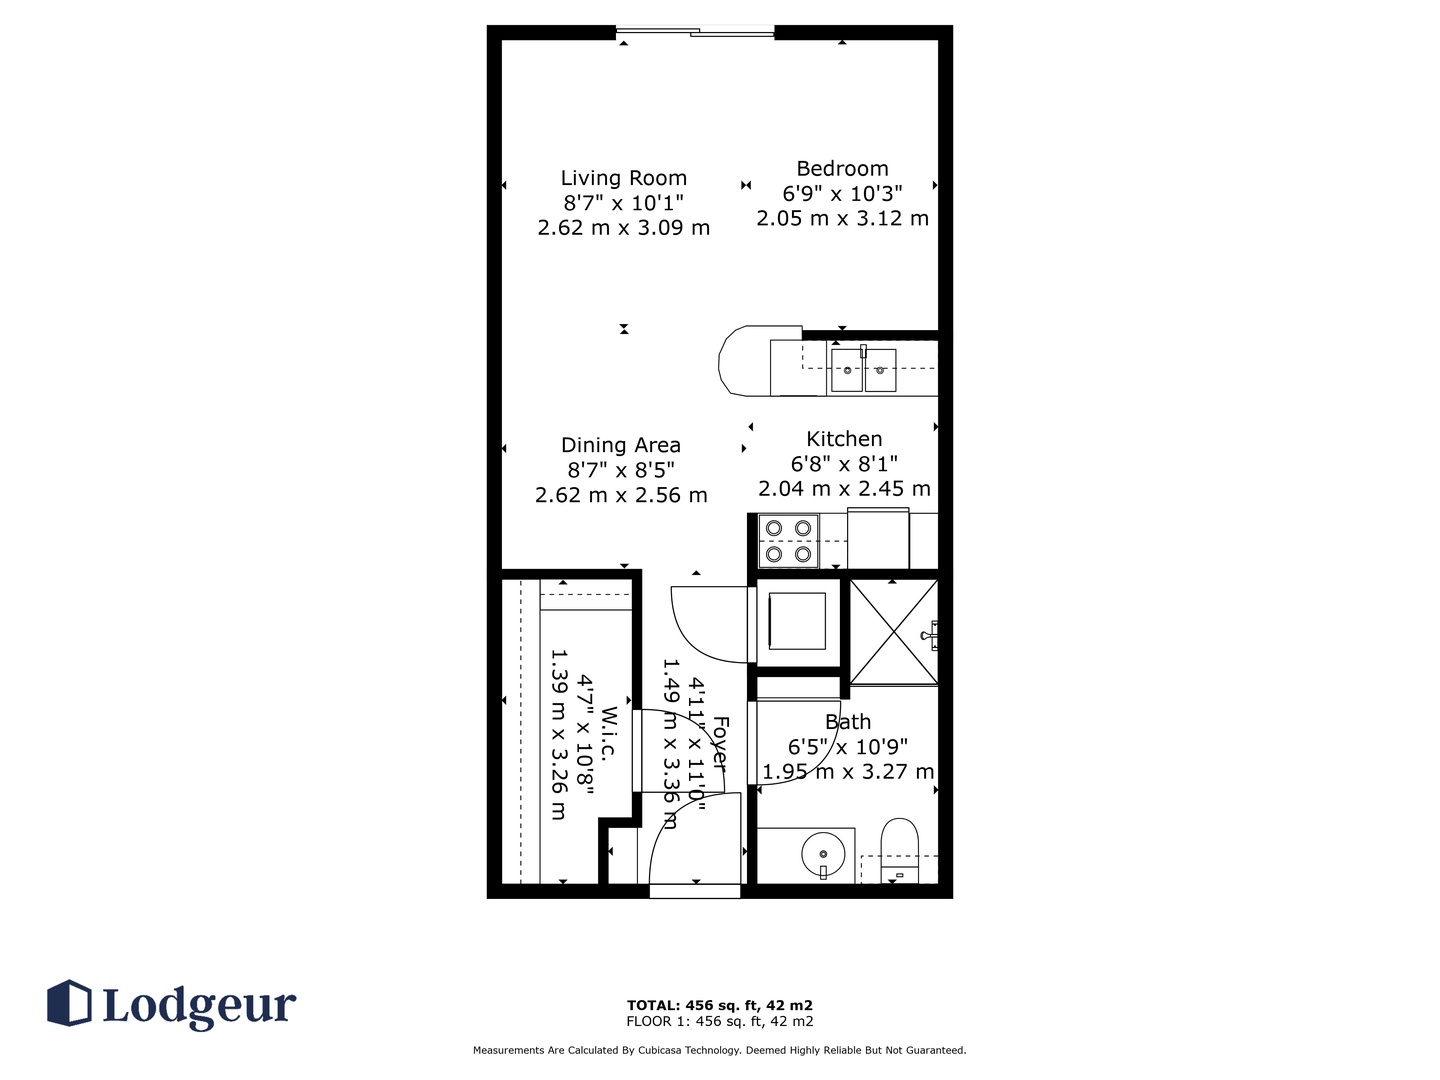 This open-concept floor plan provides a spacious and versatile living space.